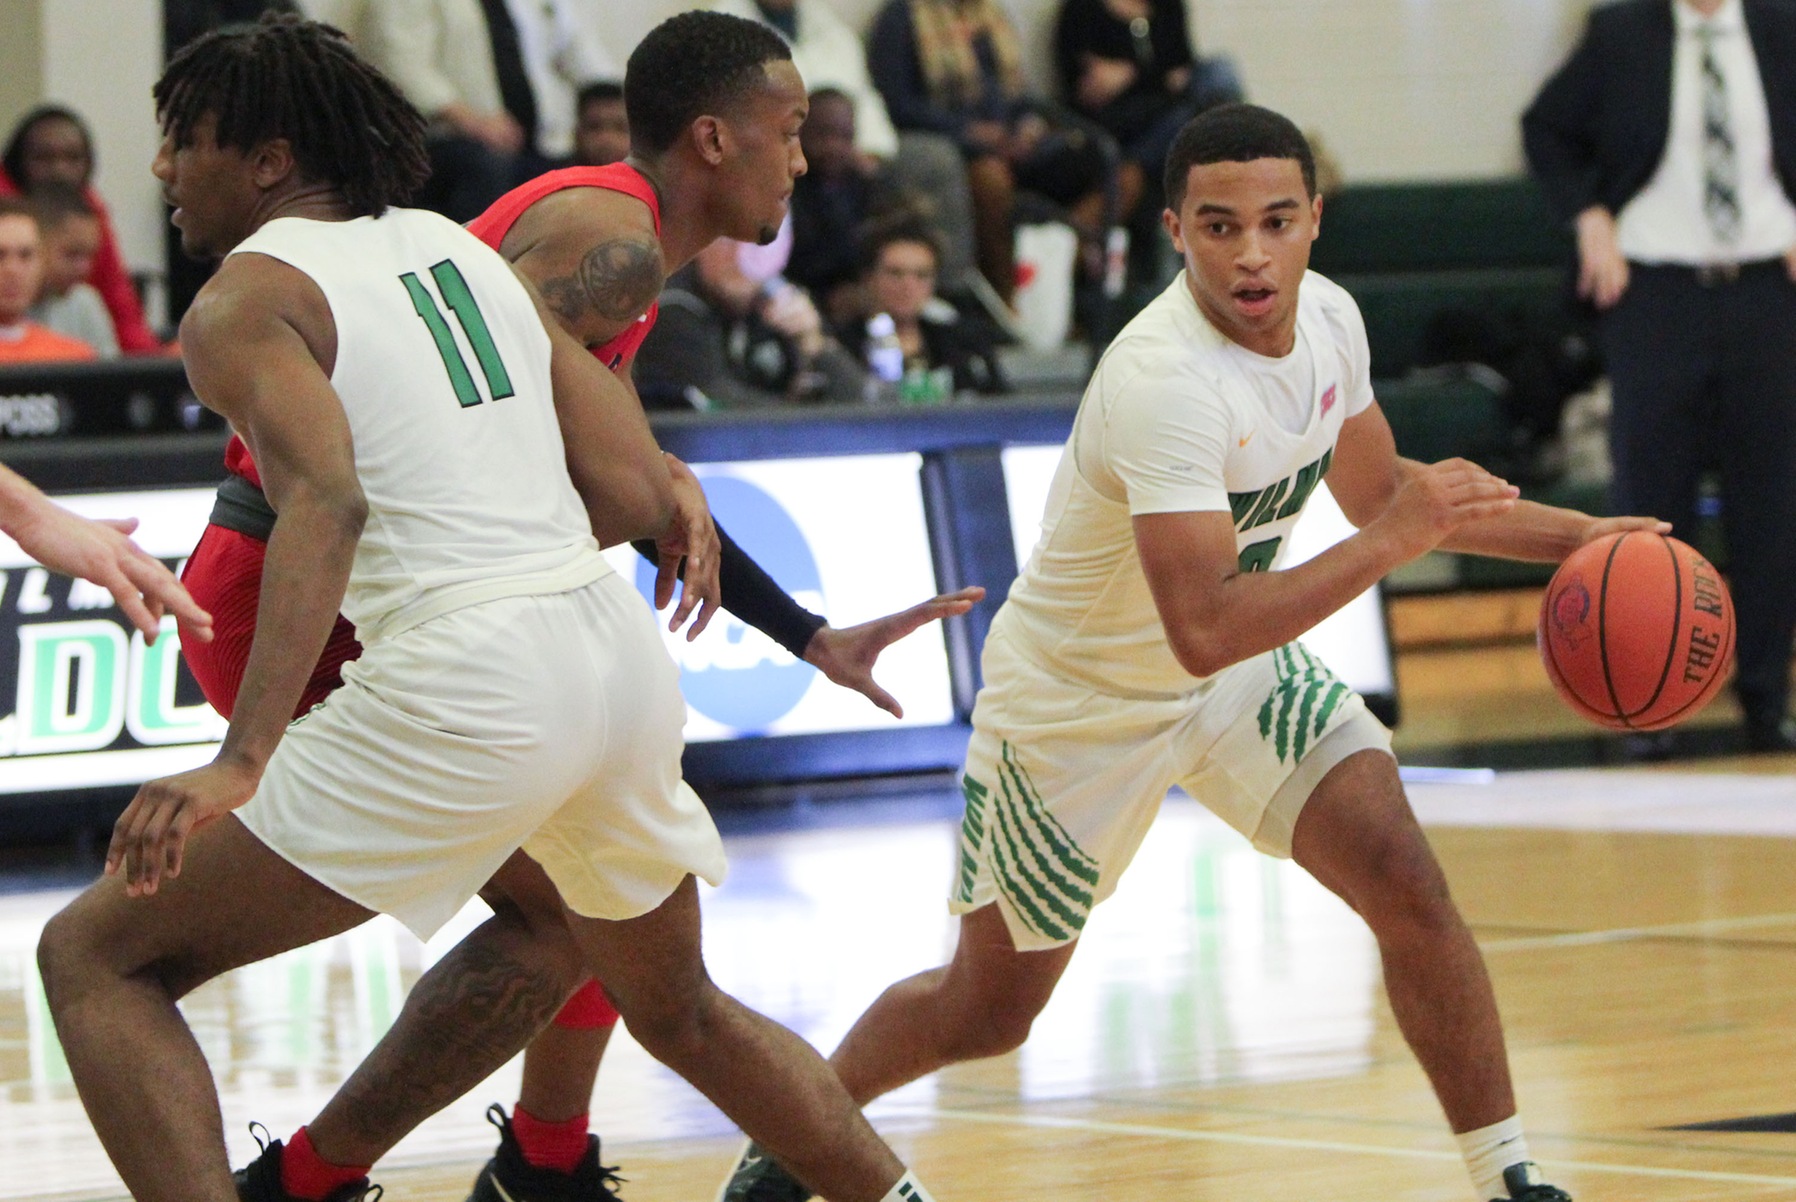 File photo of Tyler Norwood who scored 17 points off the bench at UDC. Copyright 2019; Wilmington University. All rights reserved. Photo by Samantha Kelley. November 16, 2019 vs. Shippensburg.